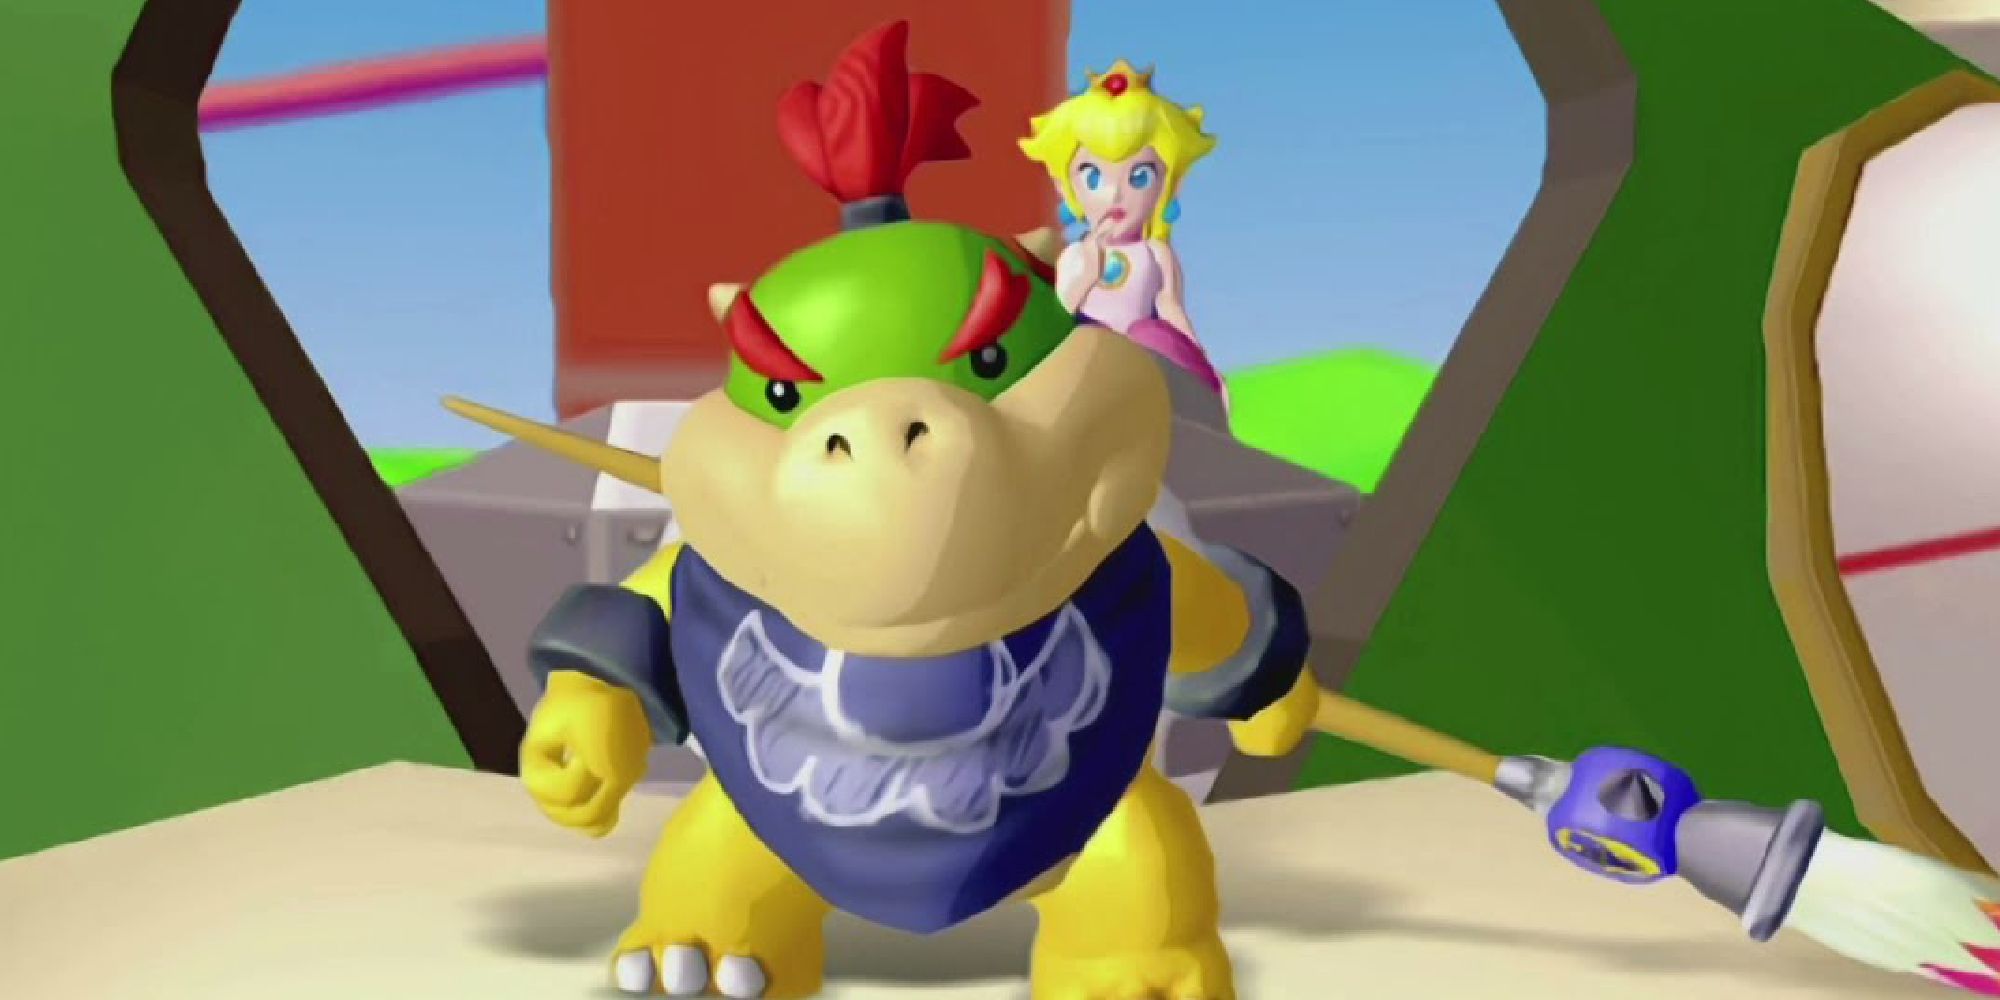 Bowser Jr. holding a paintbrush in front of Peach in Mario Sunshine